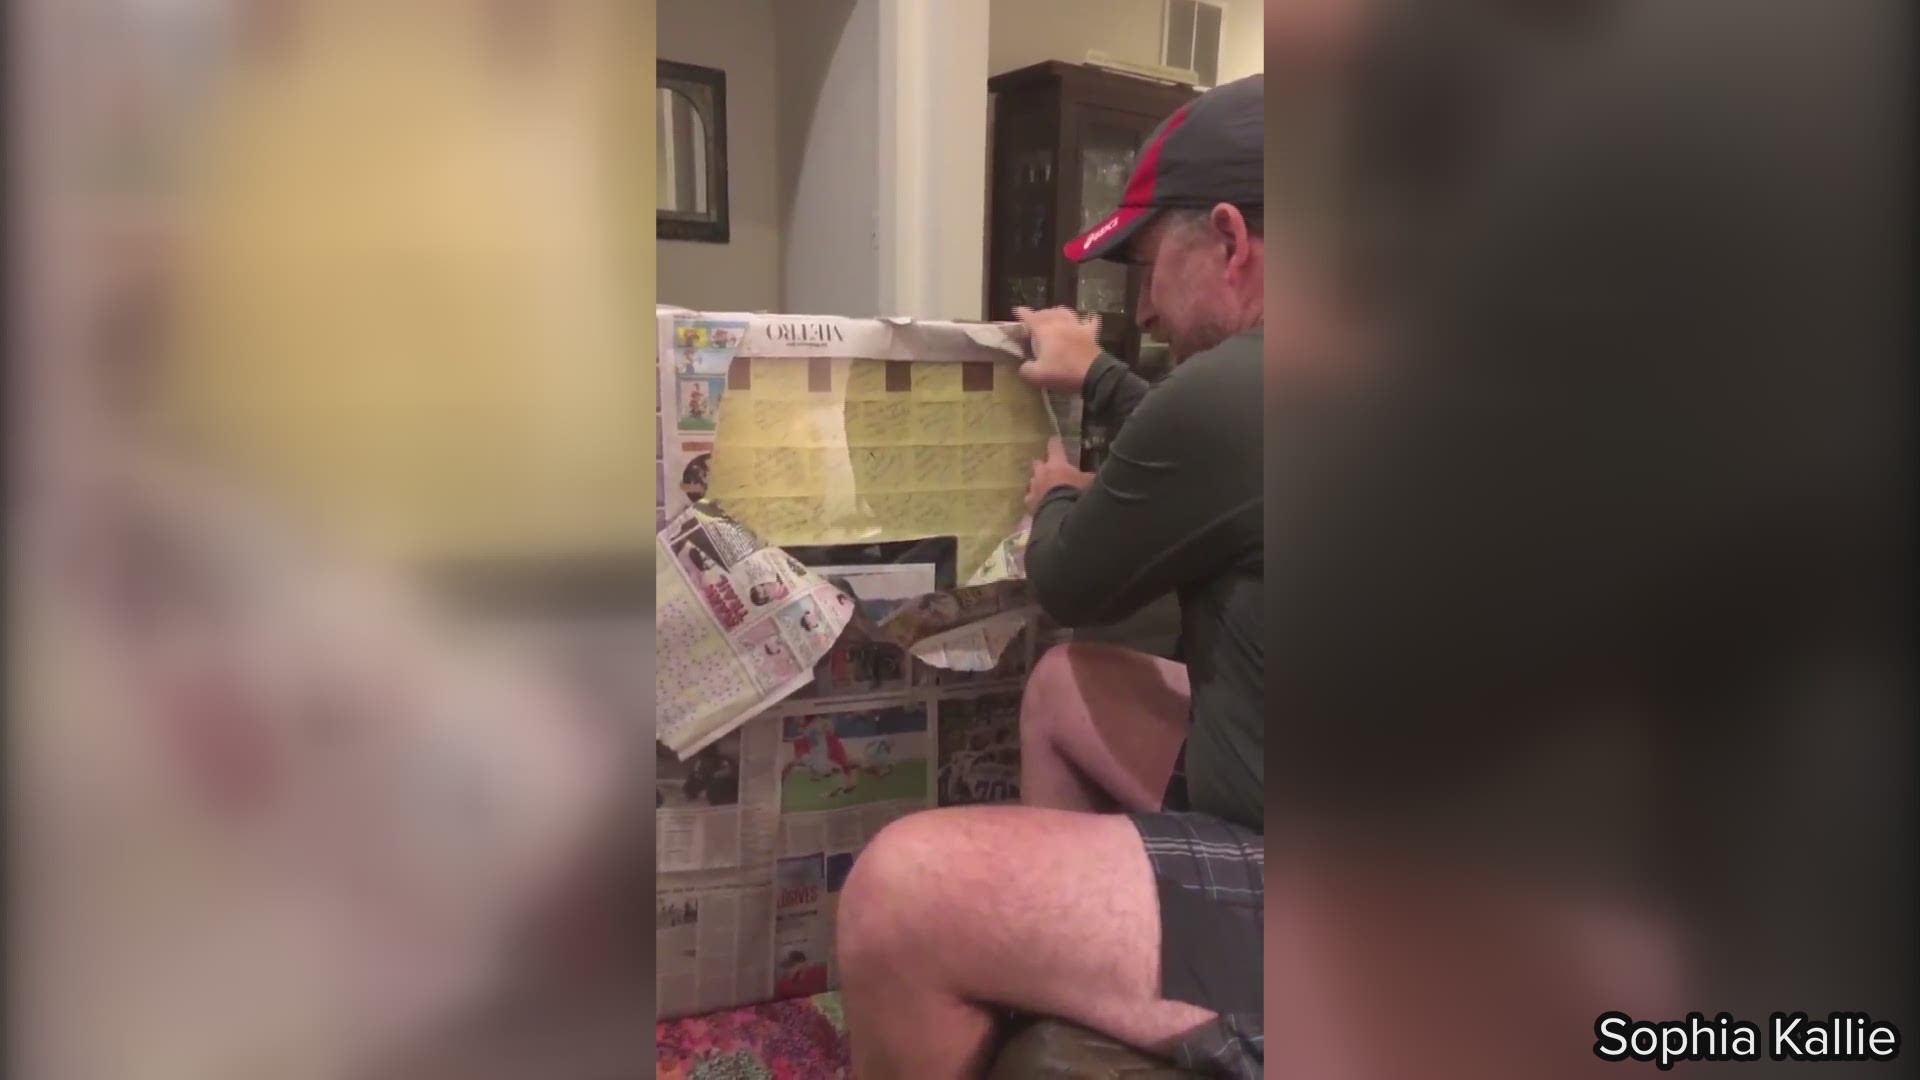 This heartwarming Father's Day video will make you cry ugly tears.

Sophia Kallie took to Twitter to share a video of her stepdad opening his Father's Day gift. She said during middle school, he would leave her a note on her door every day to "inspire me."

Kallie kept those notes, and for Father's Day she gifted him back six years worth of inspirational messages. 

In the video, her stepdad appears speechless and starts crying as soon as he unwraps the gift. Kallie had framed dozens of yellow sticky notes around what appears to be a photo of her with her stepdad.

"I kept them all," Kallie says in the video.